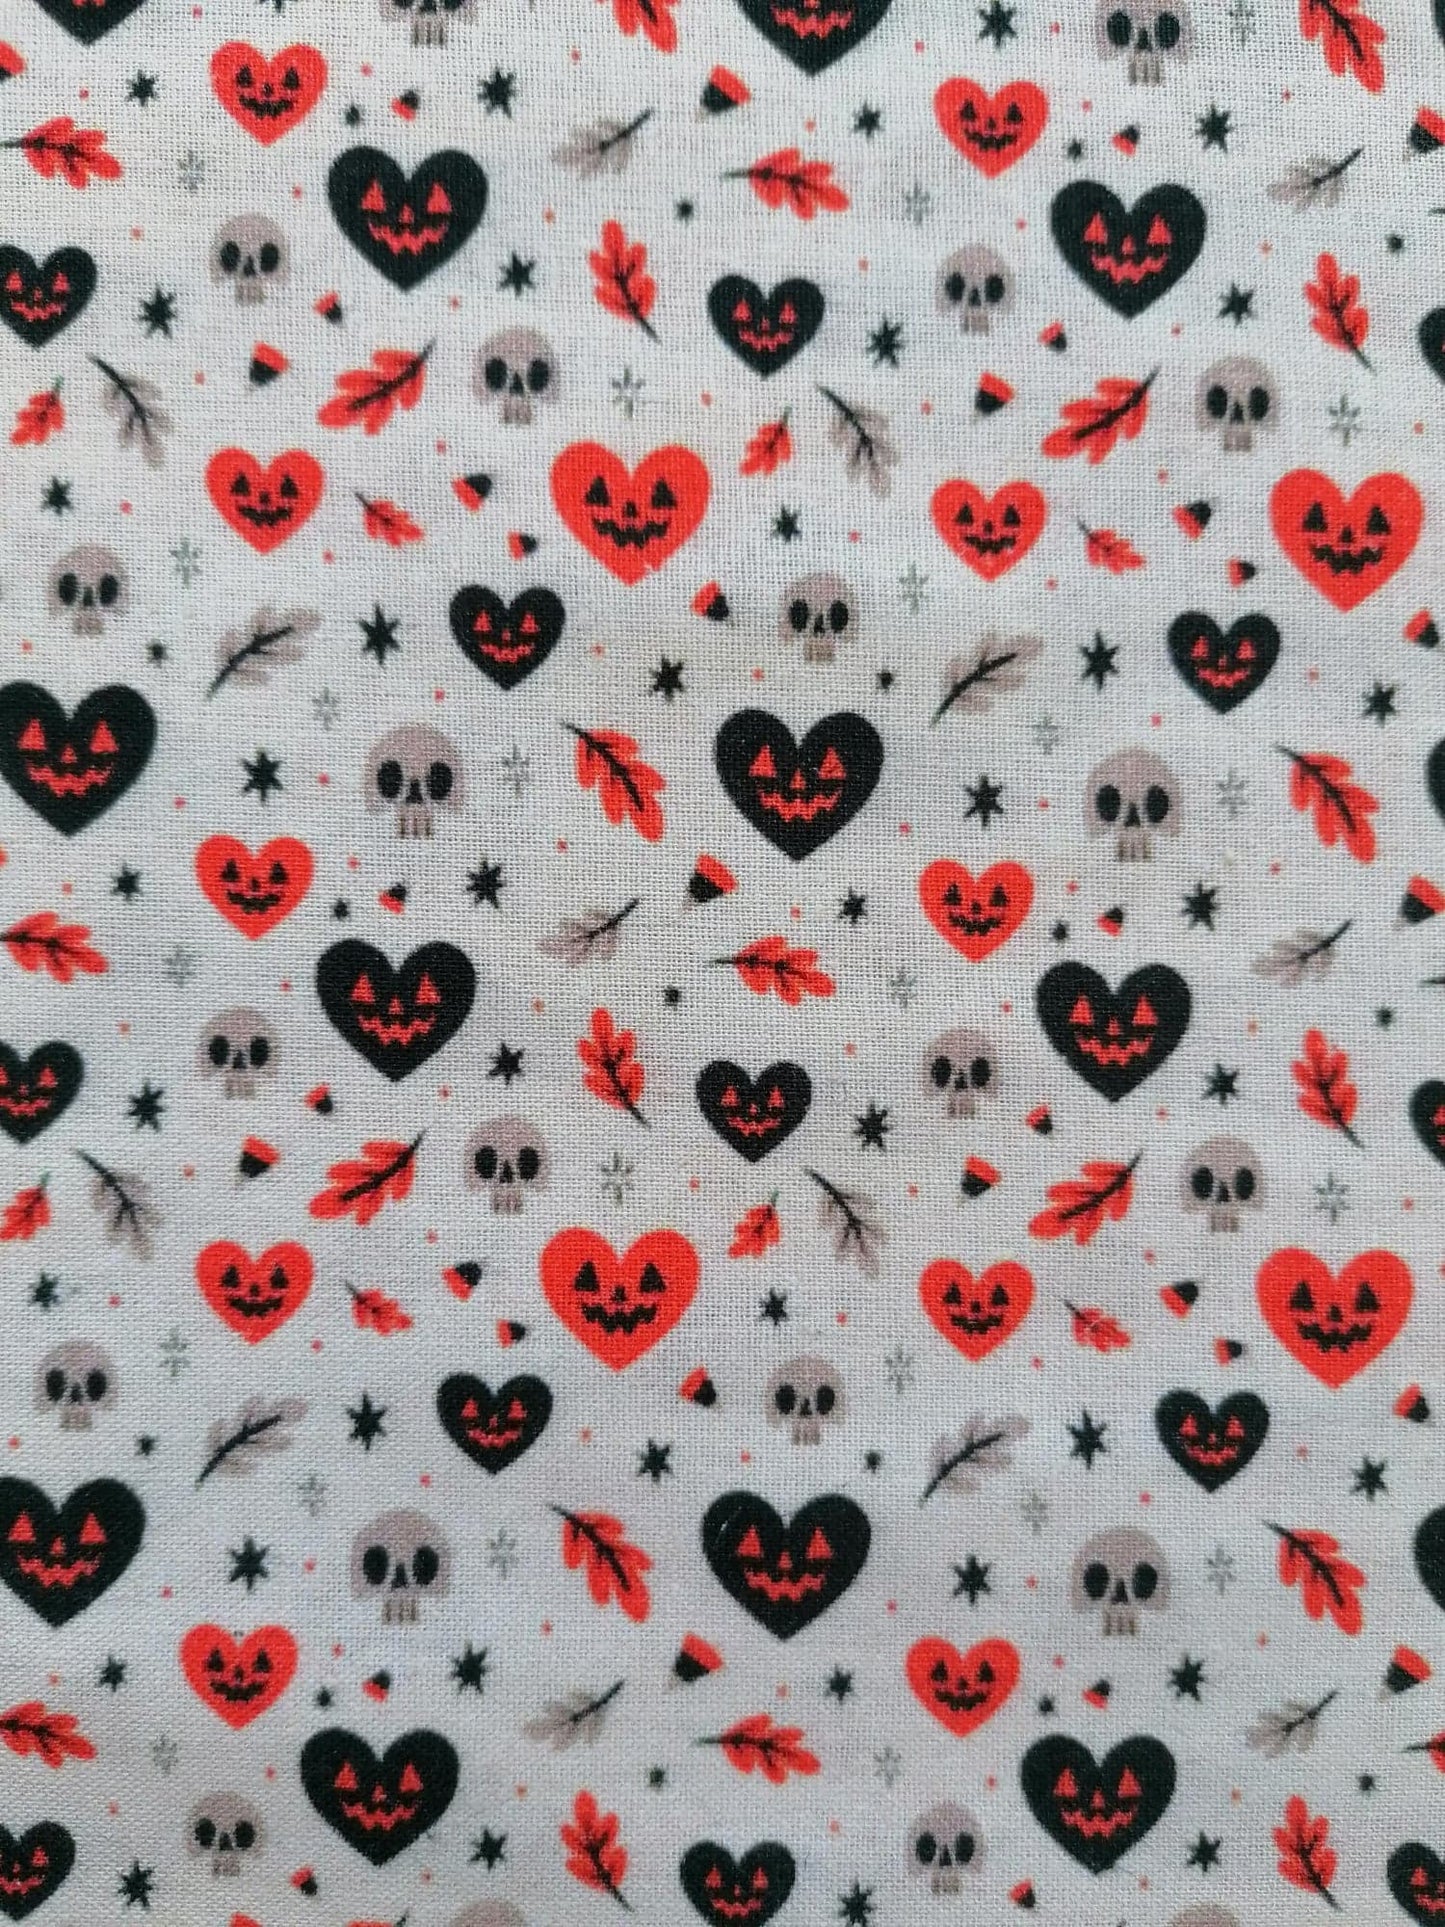 100% Cotton - Quilting and Crafting - Halloween - Cream/Orange/Black - 44" Wide - Sold By the Metre